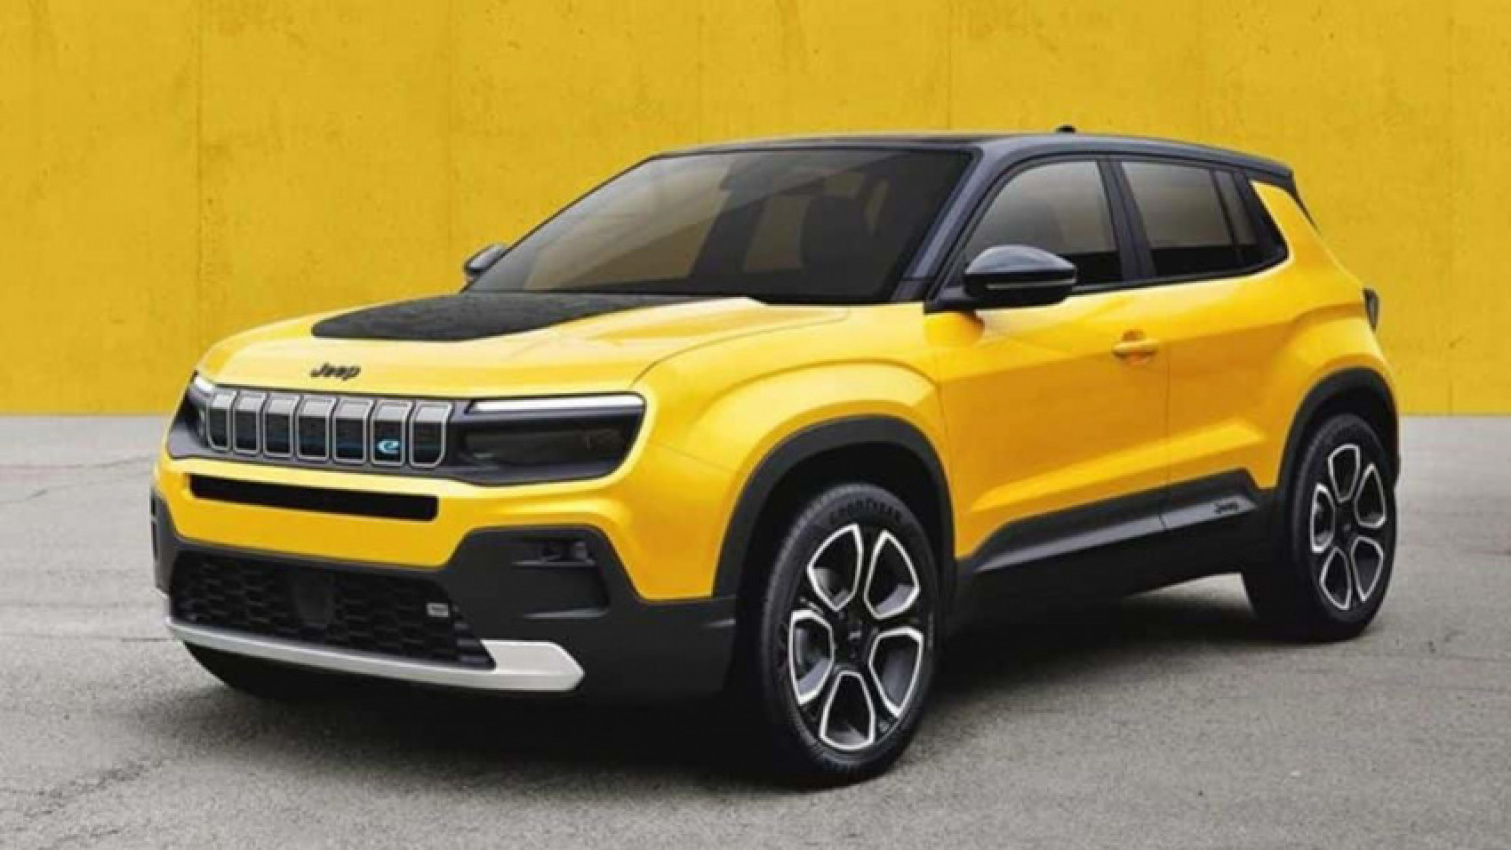 autos, cars, jeep, meet jeep's first ever electric suv; concept ev revealed ahead of 2023 launch